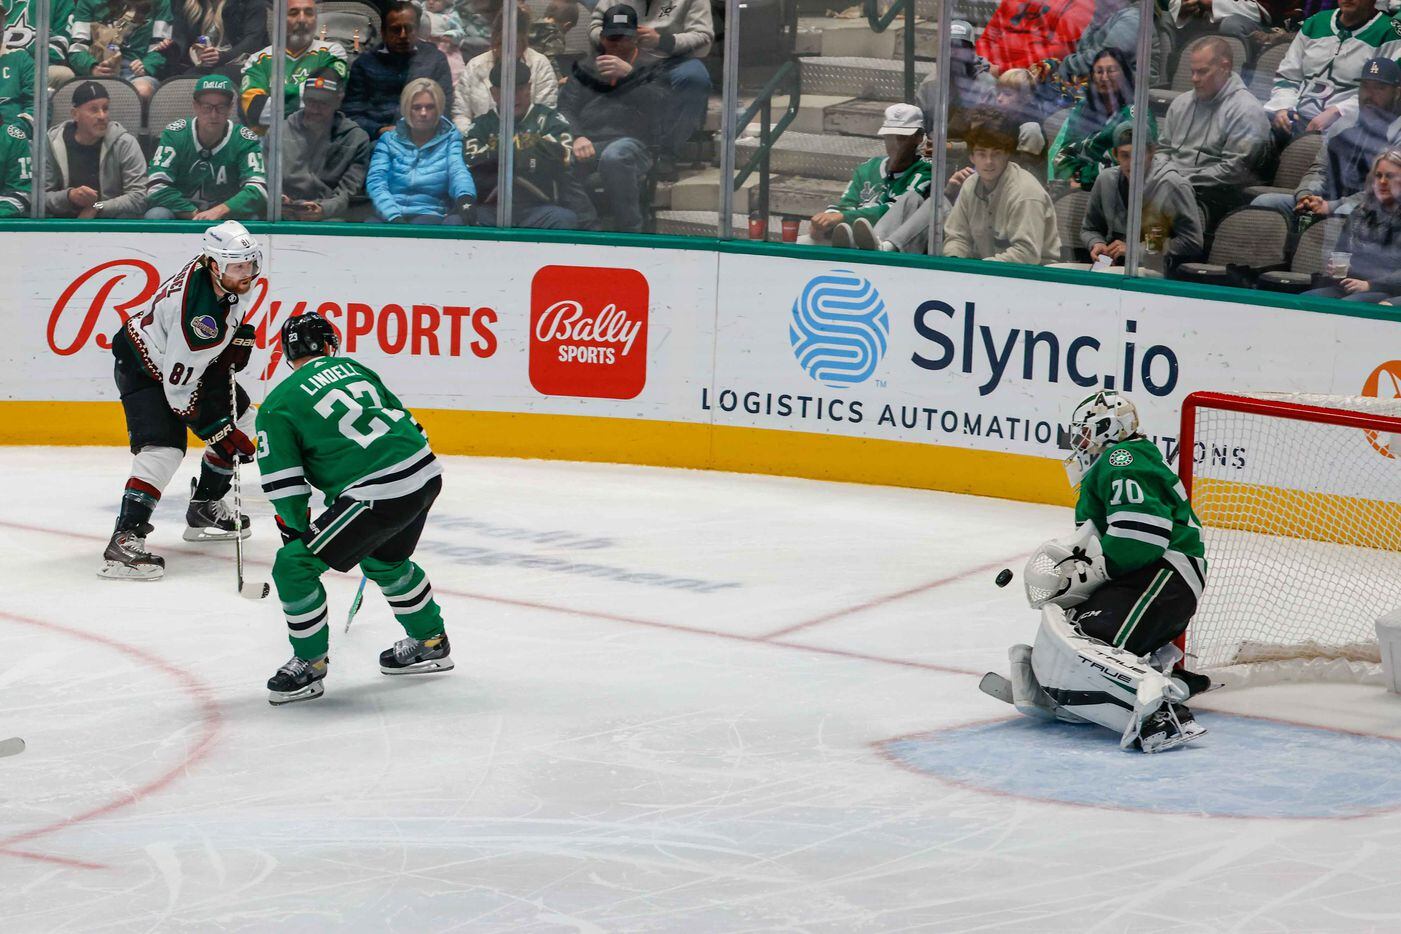 Dallas Stars goaltender Braden Holtby (70) stops a shot to the net by Arizona Coyotes right wing Phil Kessel (81) through Dallas Stars defenseman Esa Lindell (23) during third period at the American Airlines Center in Dallas on Monday, December 6, 2021. (Lola Gomez/The Dallas Morning News)